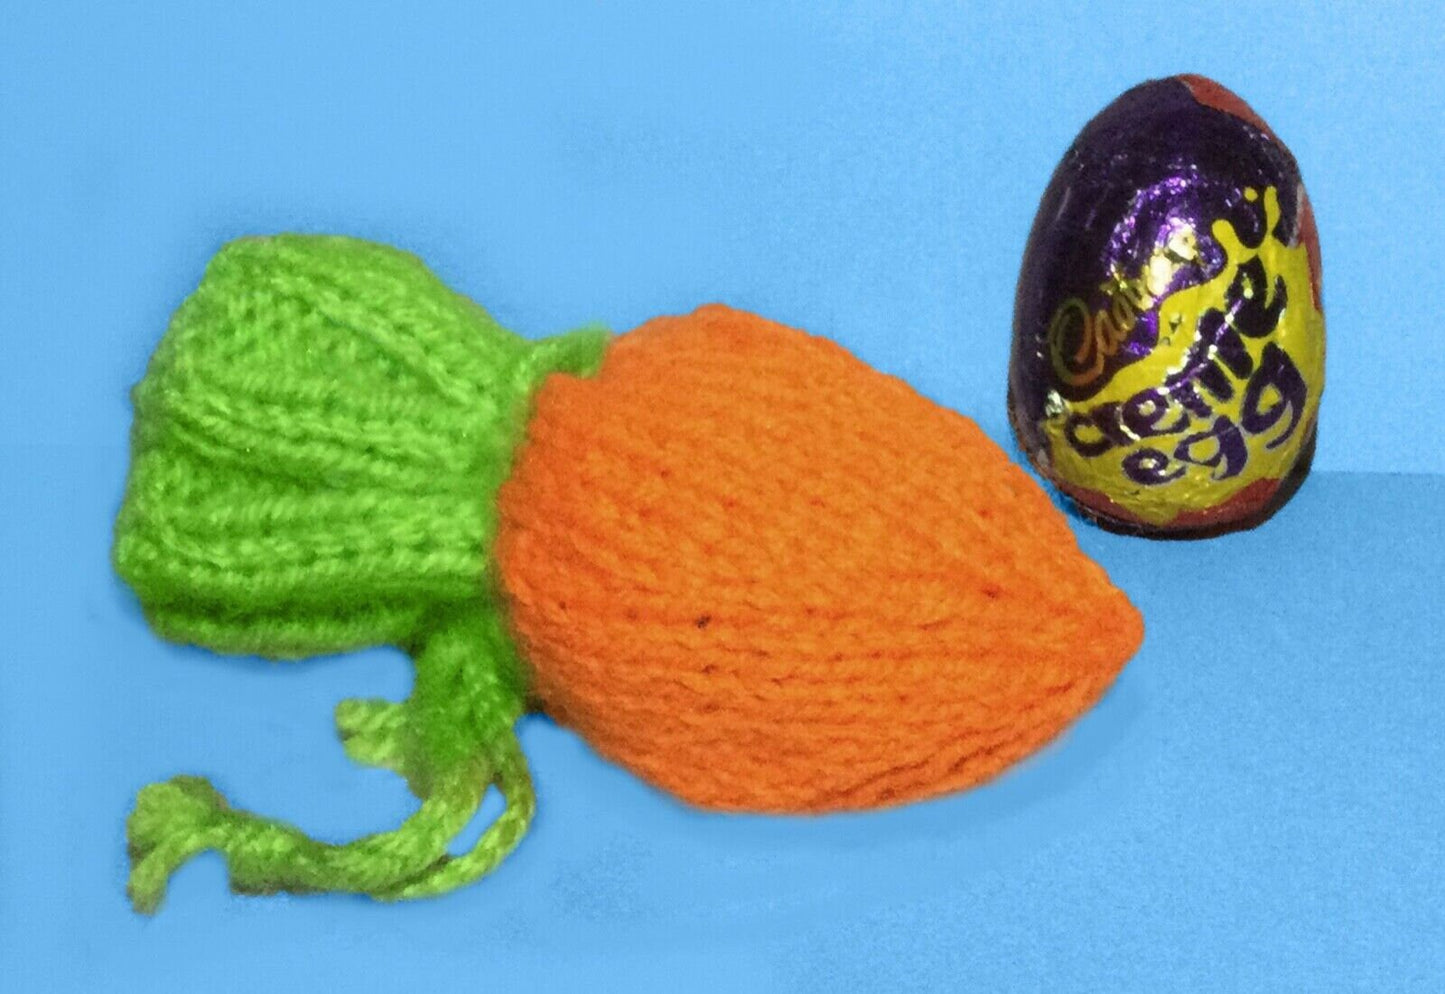 KNITTING PATTERN - Easter Carrot Drawstring chocolate cover fits Creme Egg